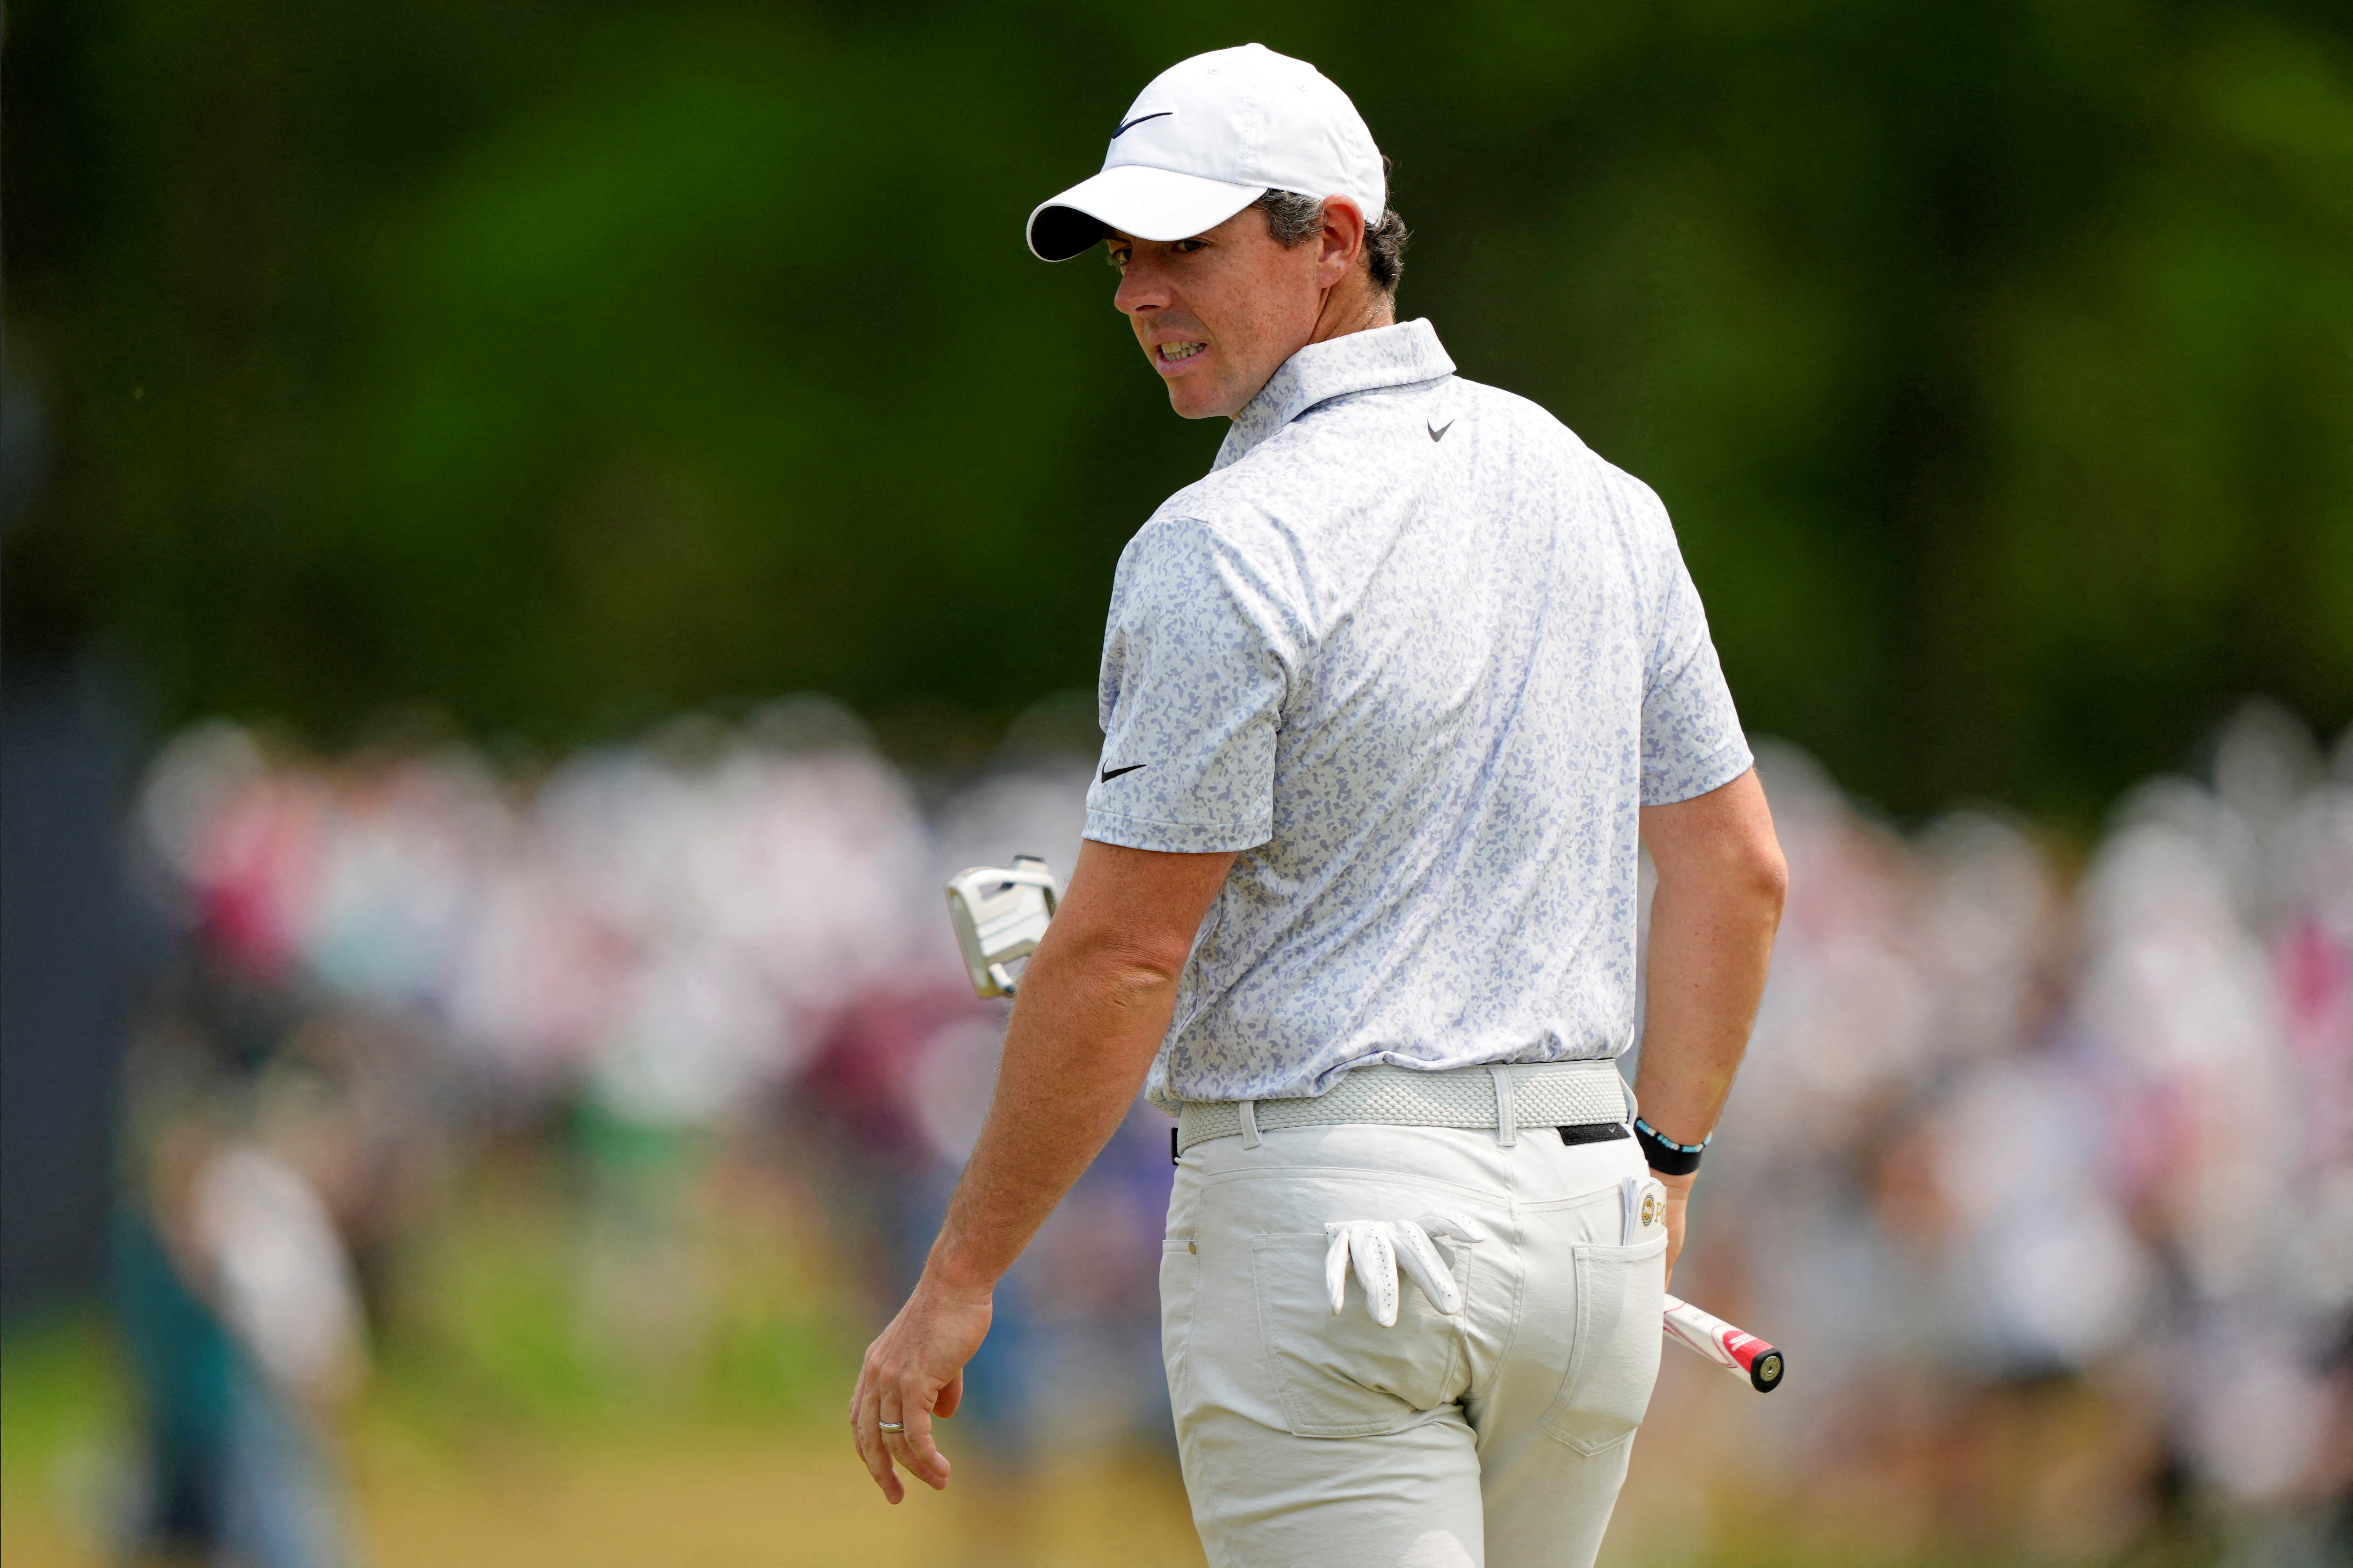 Golf-Nothing memorable about PGA Championship for McIlroy except Block's ace